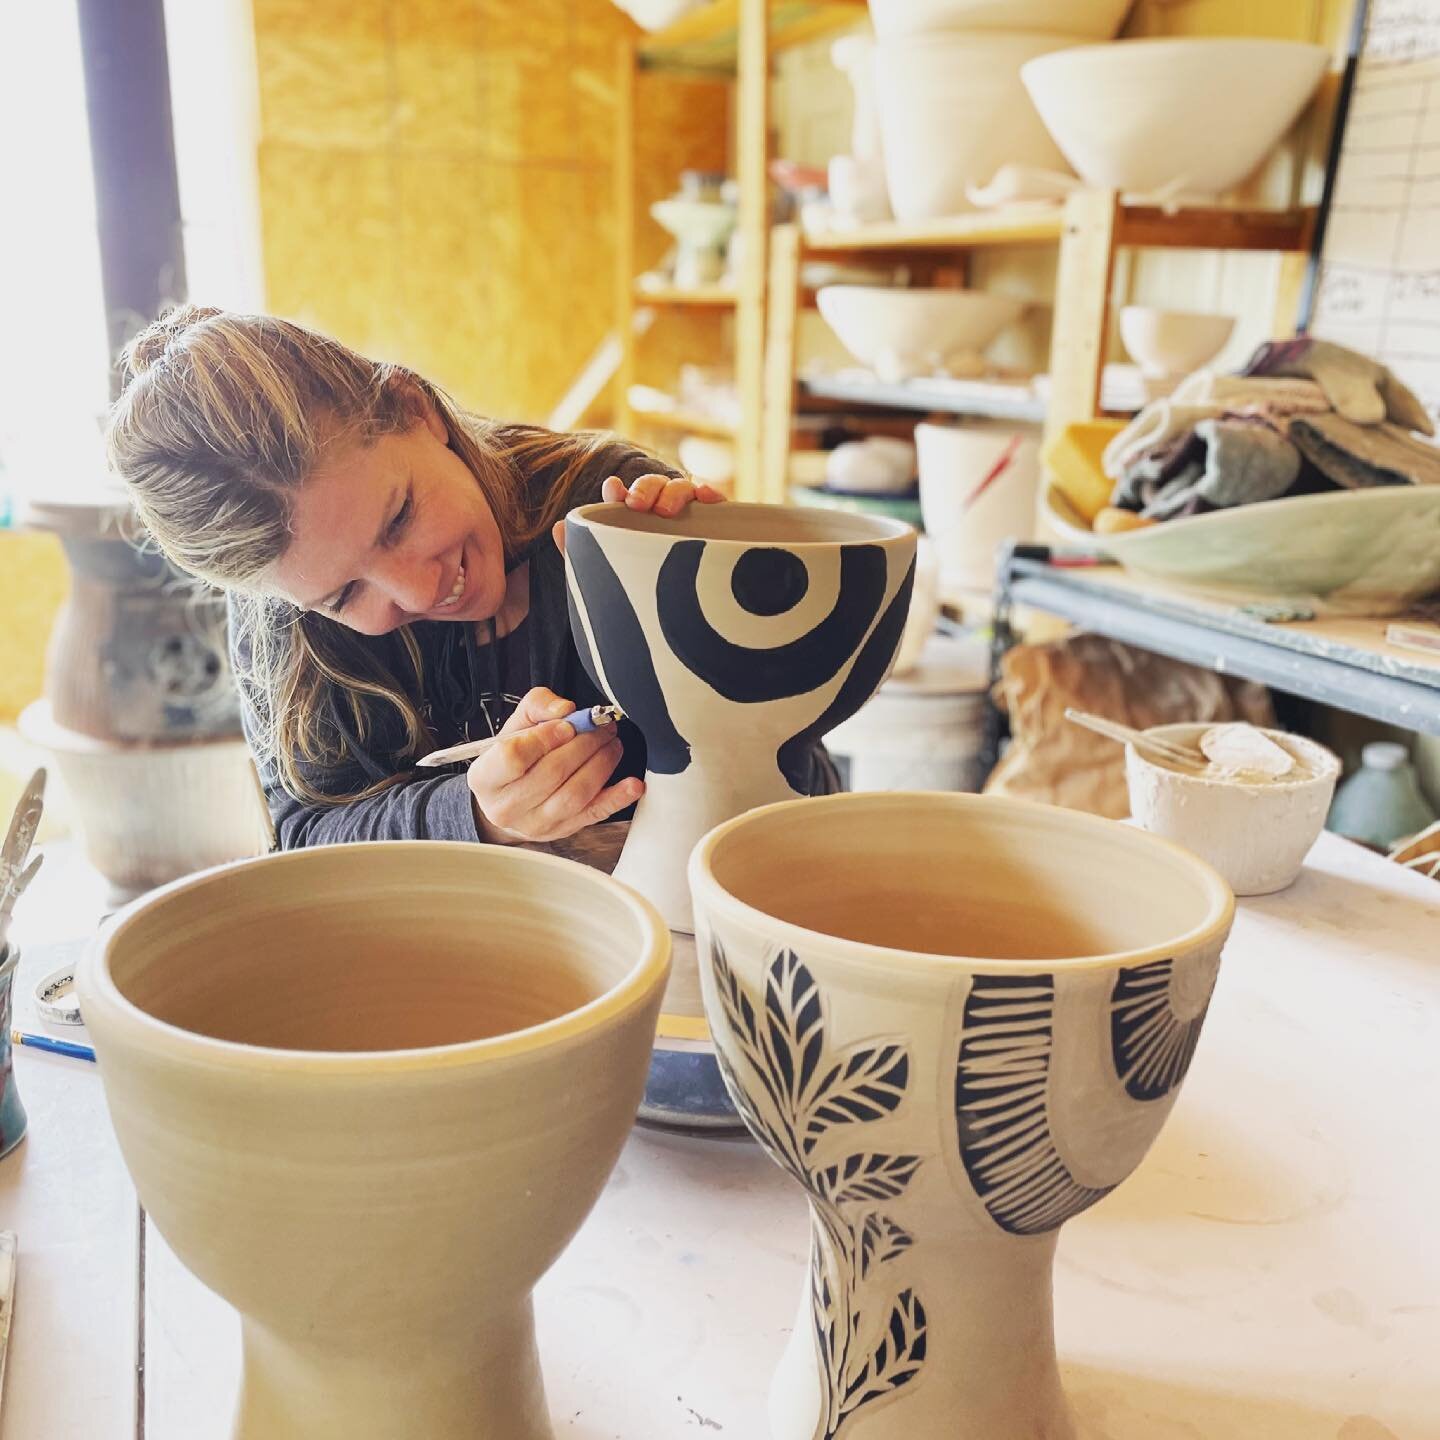 The sun is out and my friend stopped by to chat while I worked. She took several photos that would prove I make pretty awful faces while I work, but then we also laugh a lot. Finally unloaded a kiln just now!! It&rsquo;s been forever!! I&rsquo;ll be 